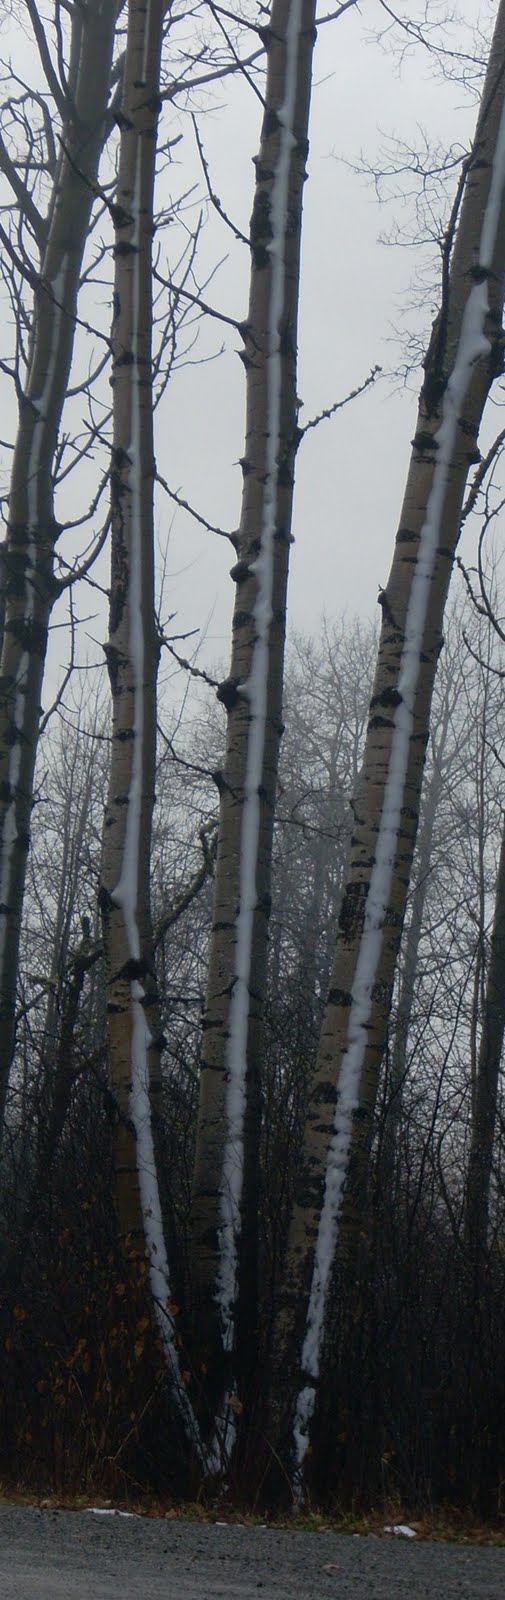 snow  on the trees